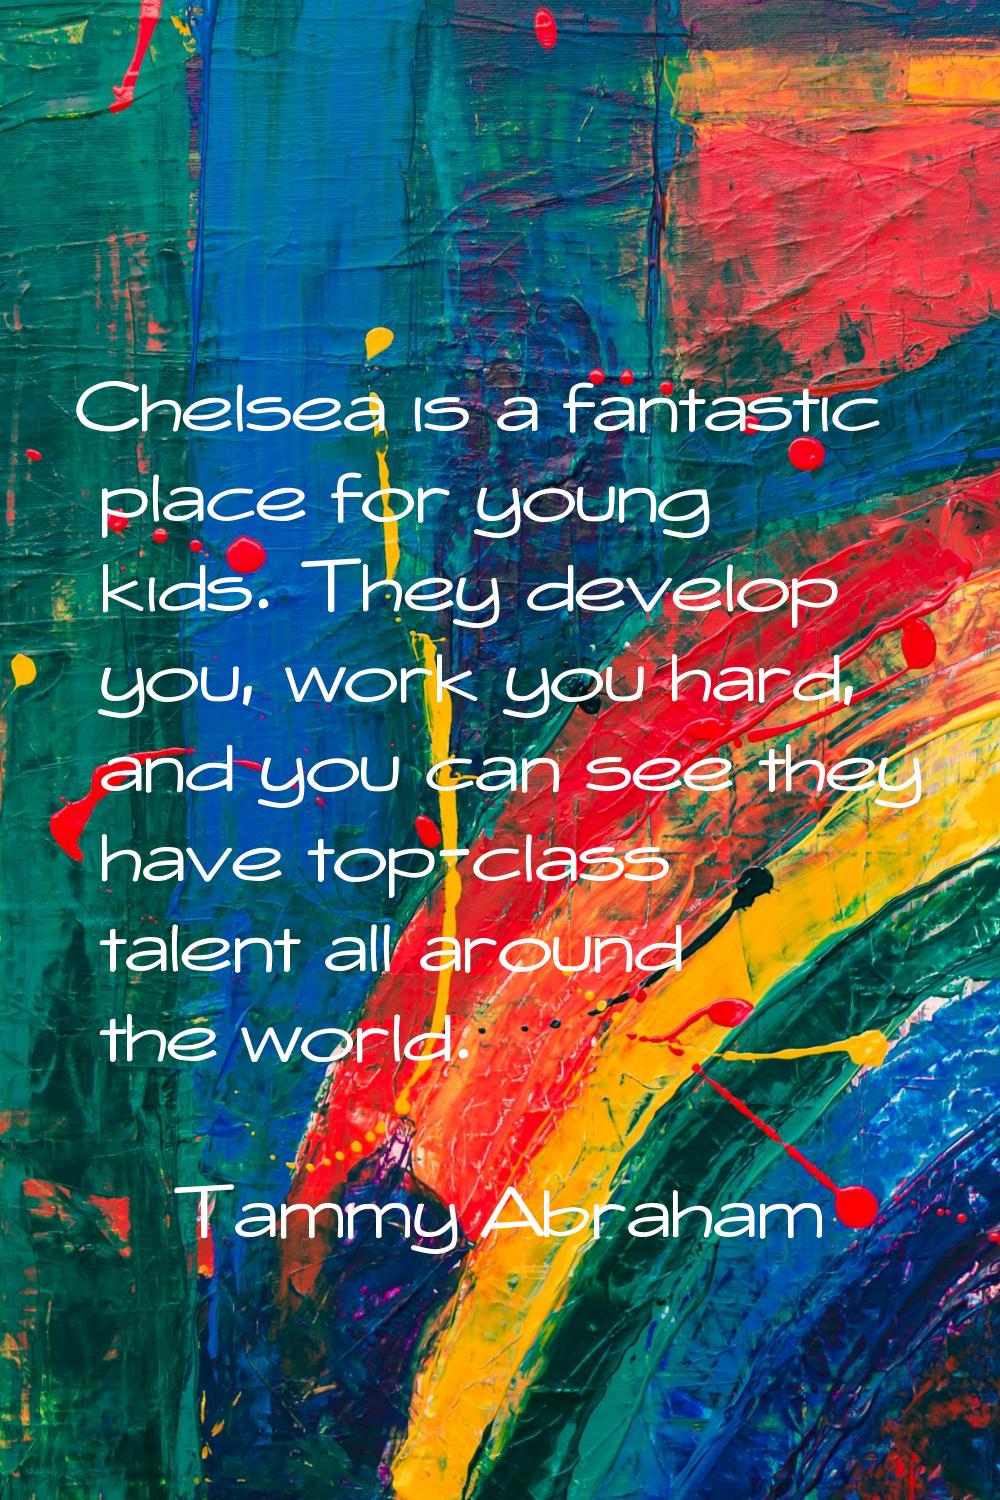 Chelsea is a fantastic place for young kids. They develop you, work you hard, and you can see they 